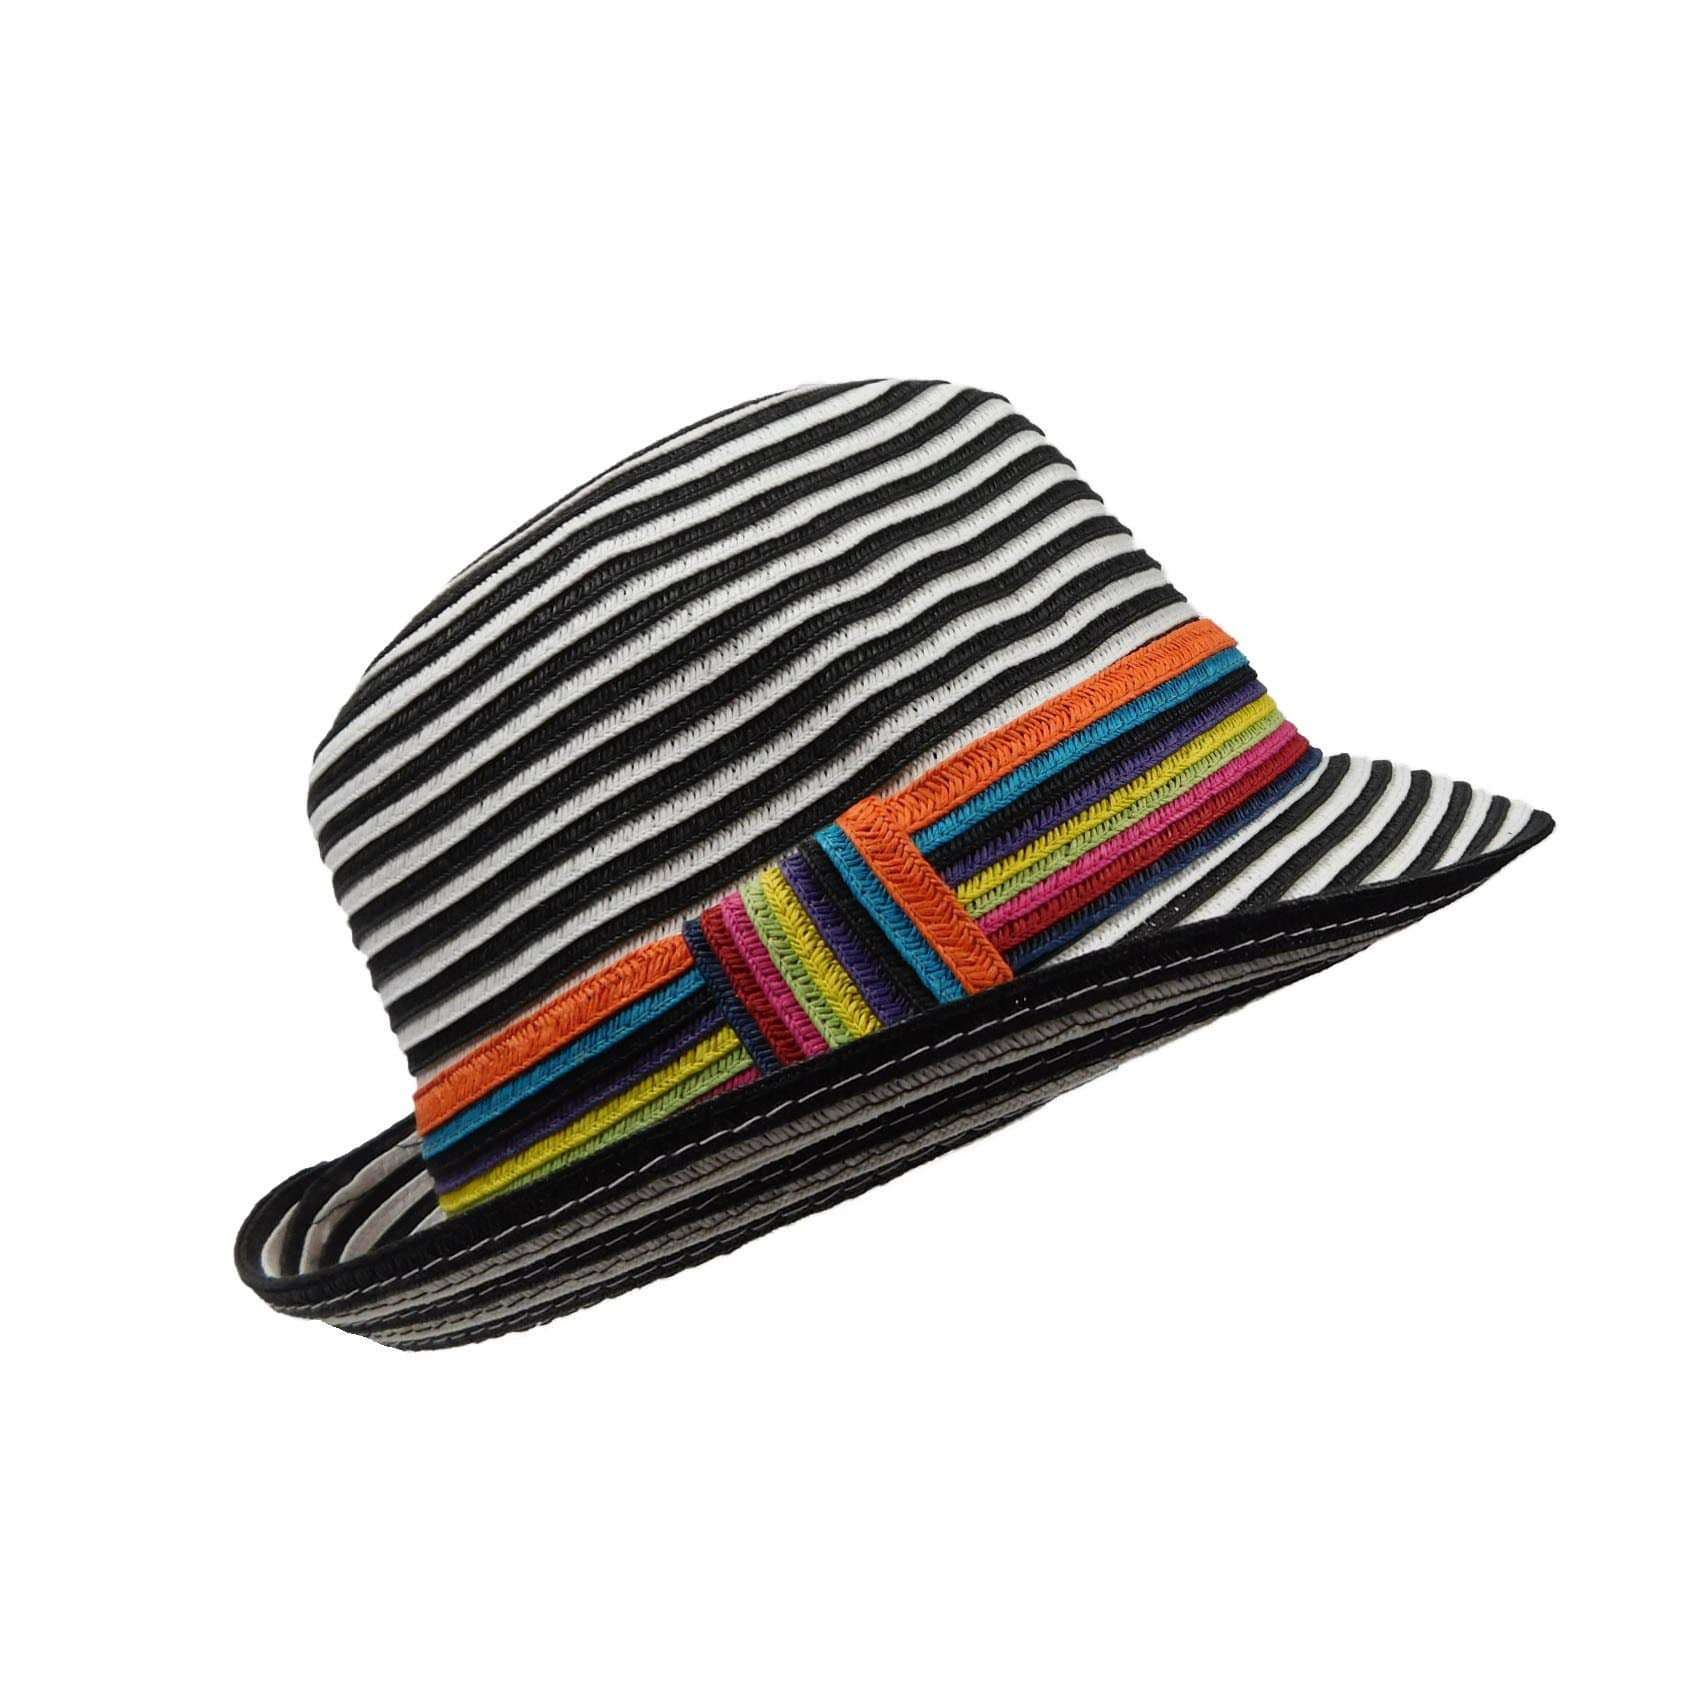 Black and White Striped Summer Fedora Hat - Jeanne Simmons Hats Fedora Hat Jeanne Simmons    